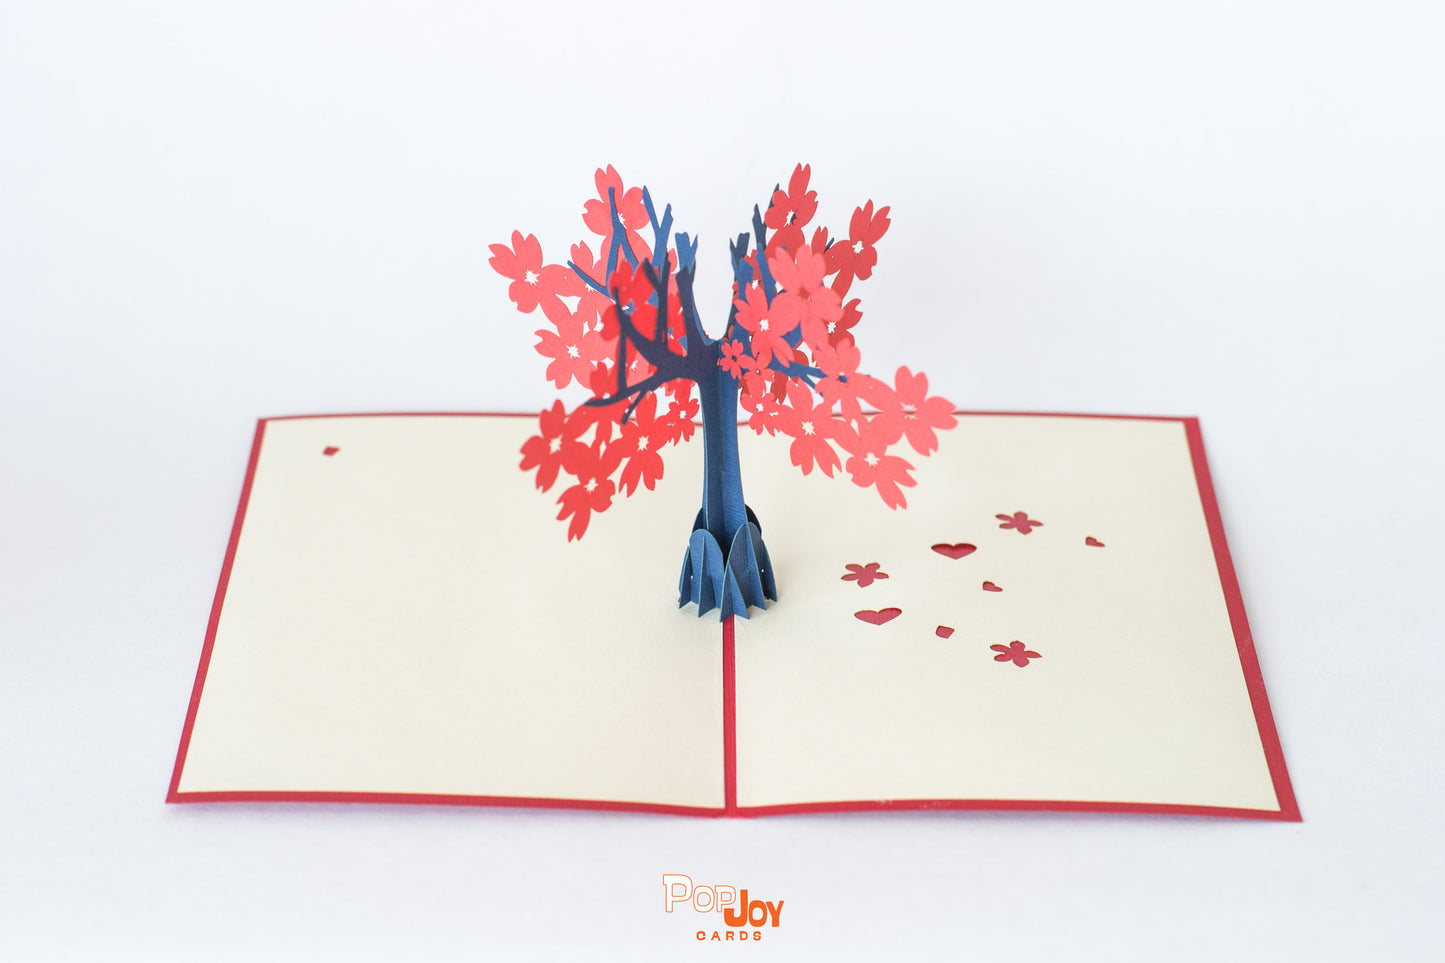 Pop-up card showing tree with big red flowers against cream card background